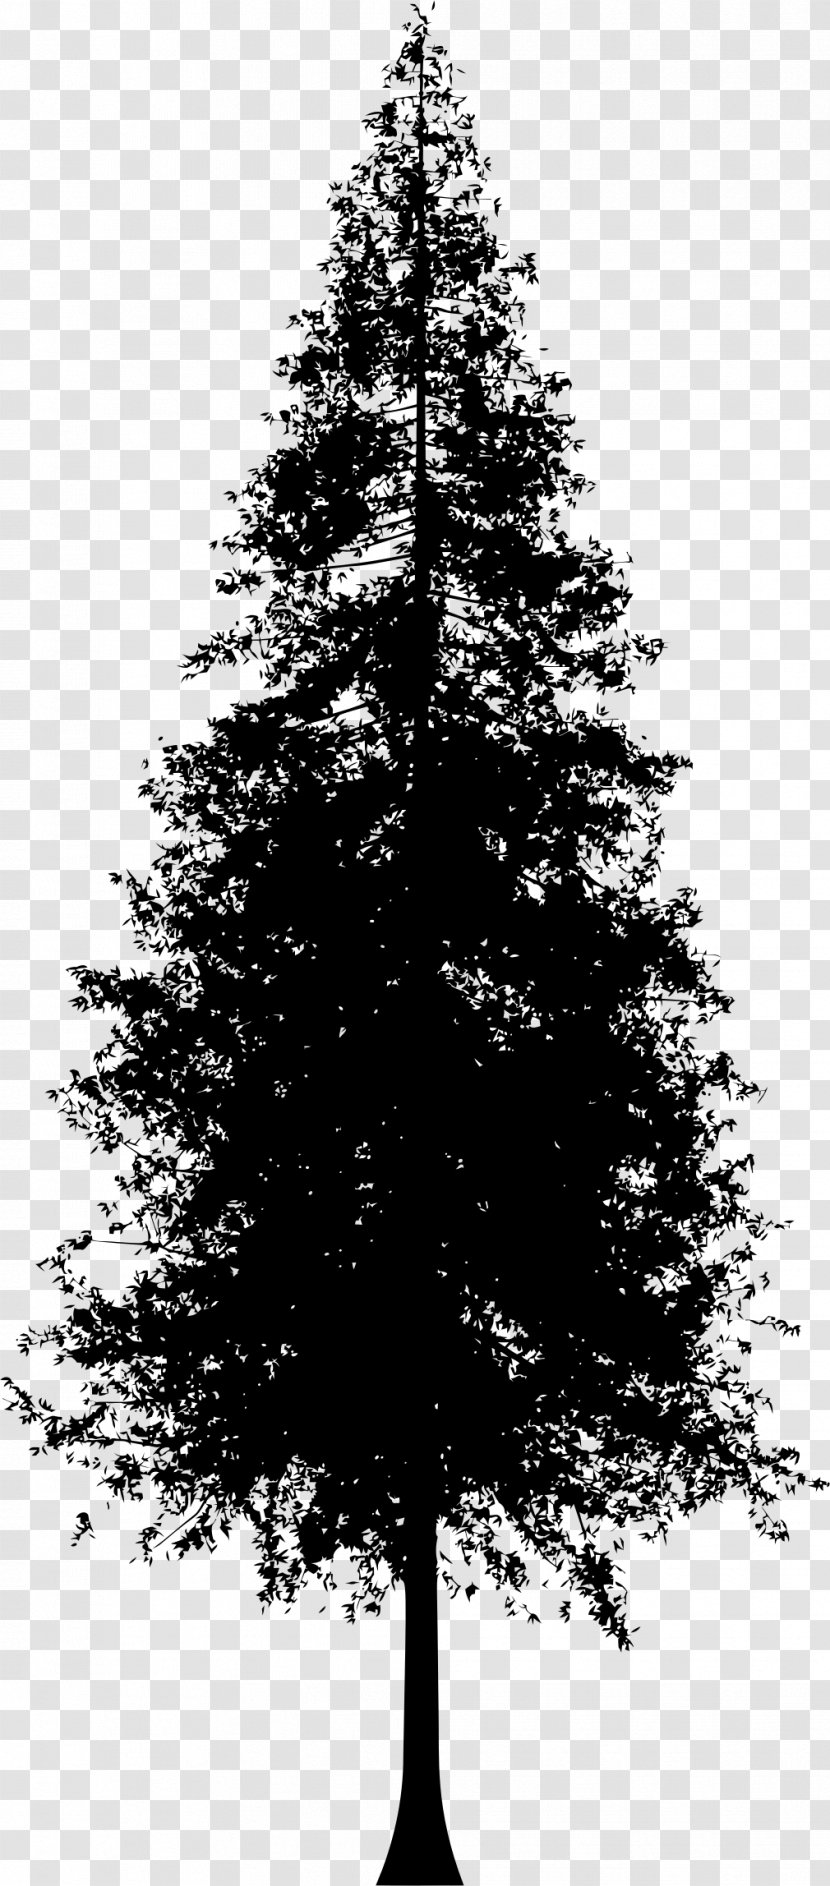 Redwoods Silhouette Coast Redwood Clip Art - Black And White - Pine Tree Transparent PNG